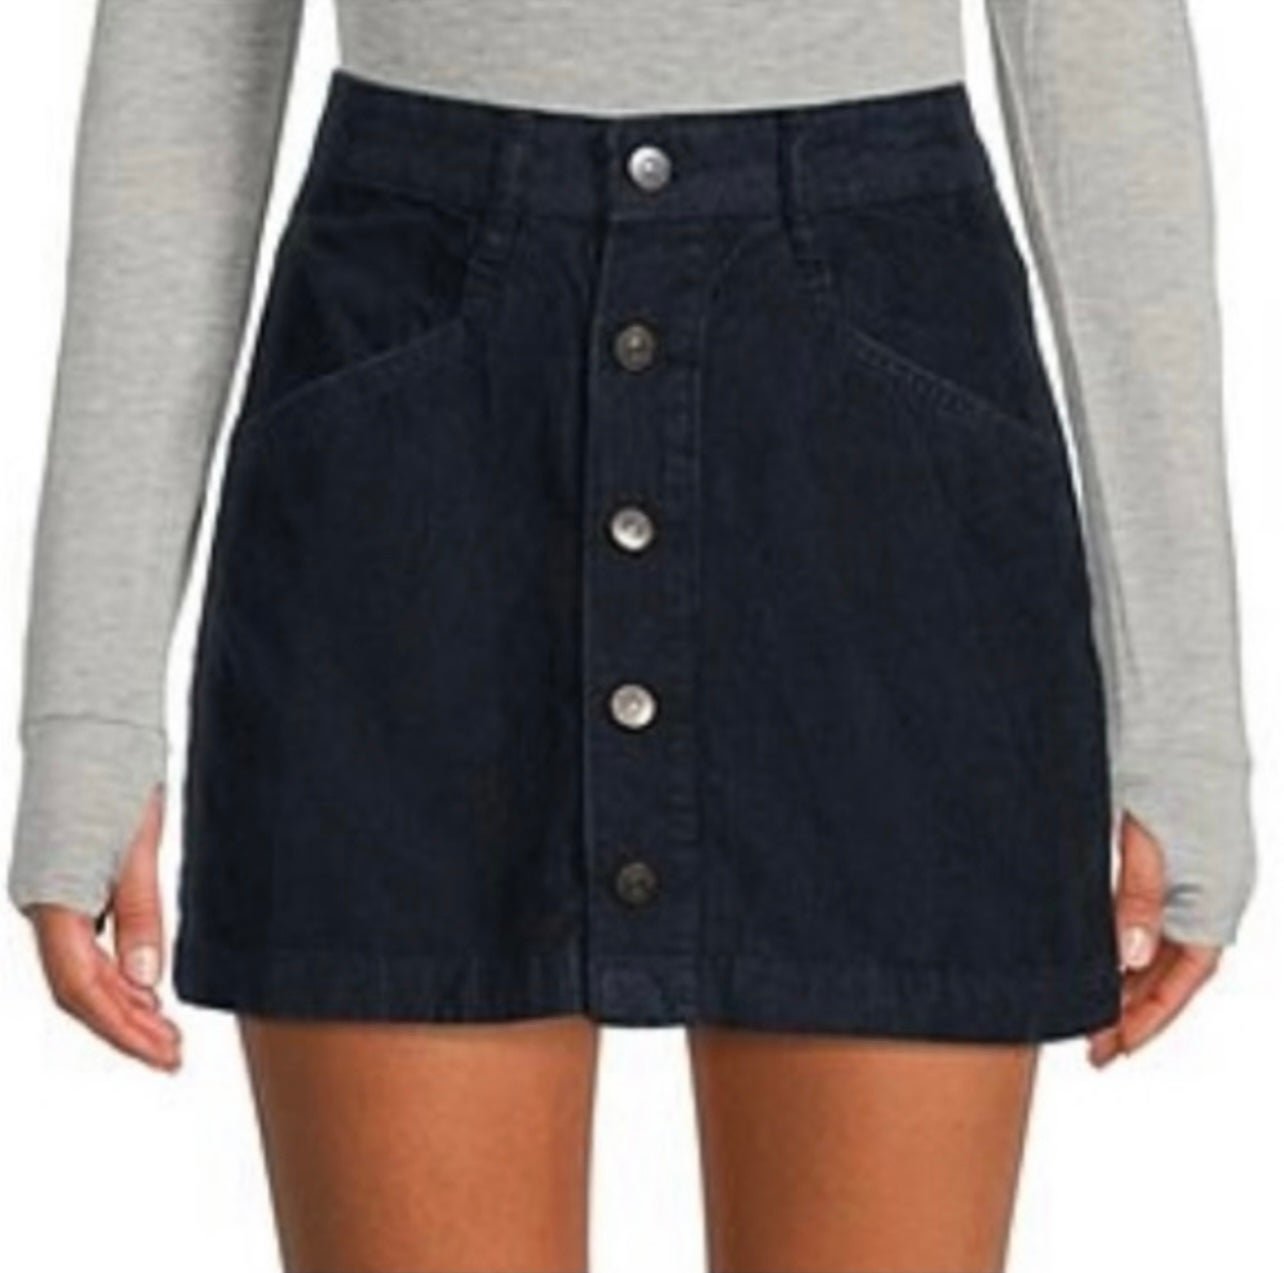 Authentic NWT Free People Ray Corduroy Mini Skirt - size 8 H3iw7DkOl Cheap